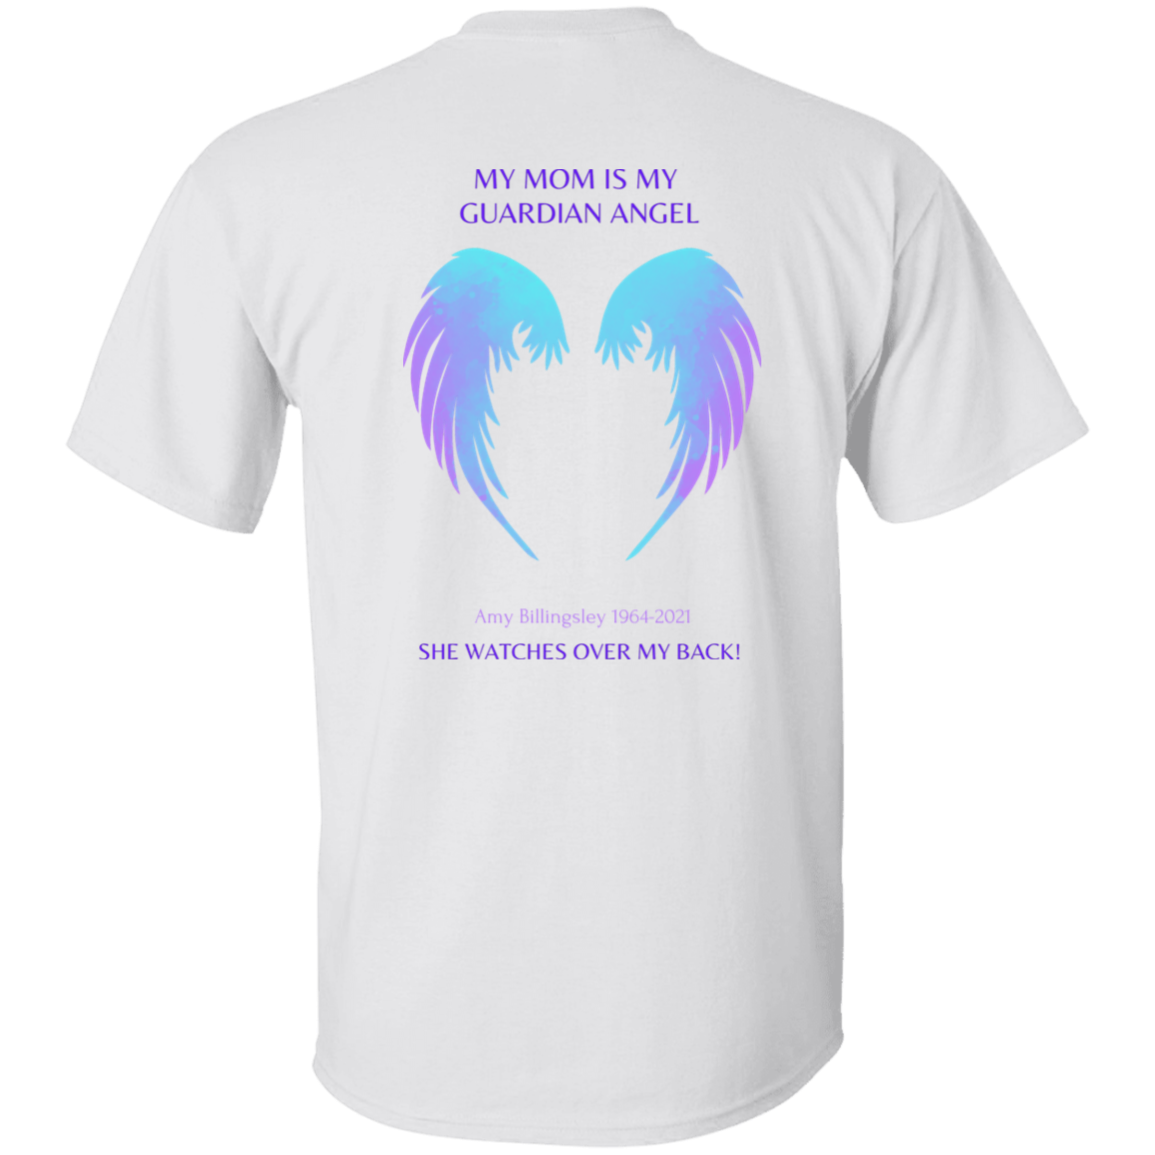 MY MOM IS MY GUARDIAN ANGEL CUSTOMIZE NAME & DATE  T-Shirt Remembrance Gift Memorial Gift Loss of Mom Loved One Angel Wings